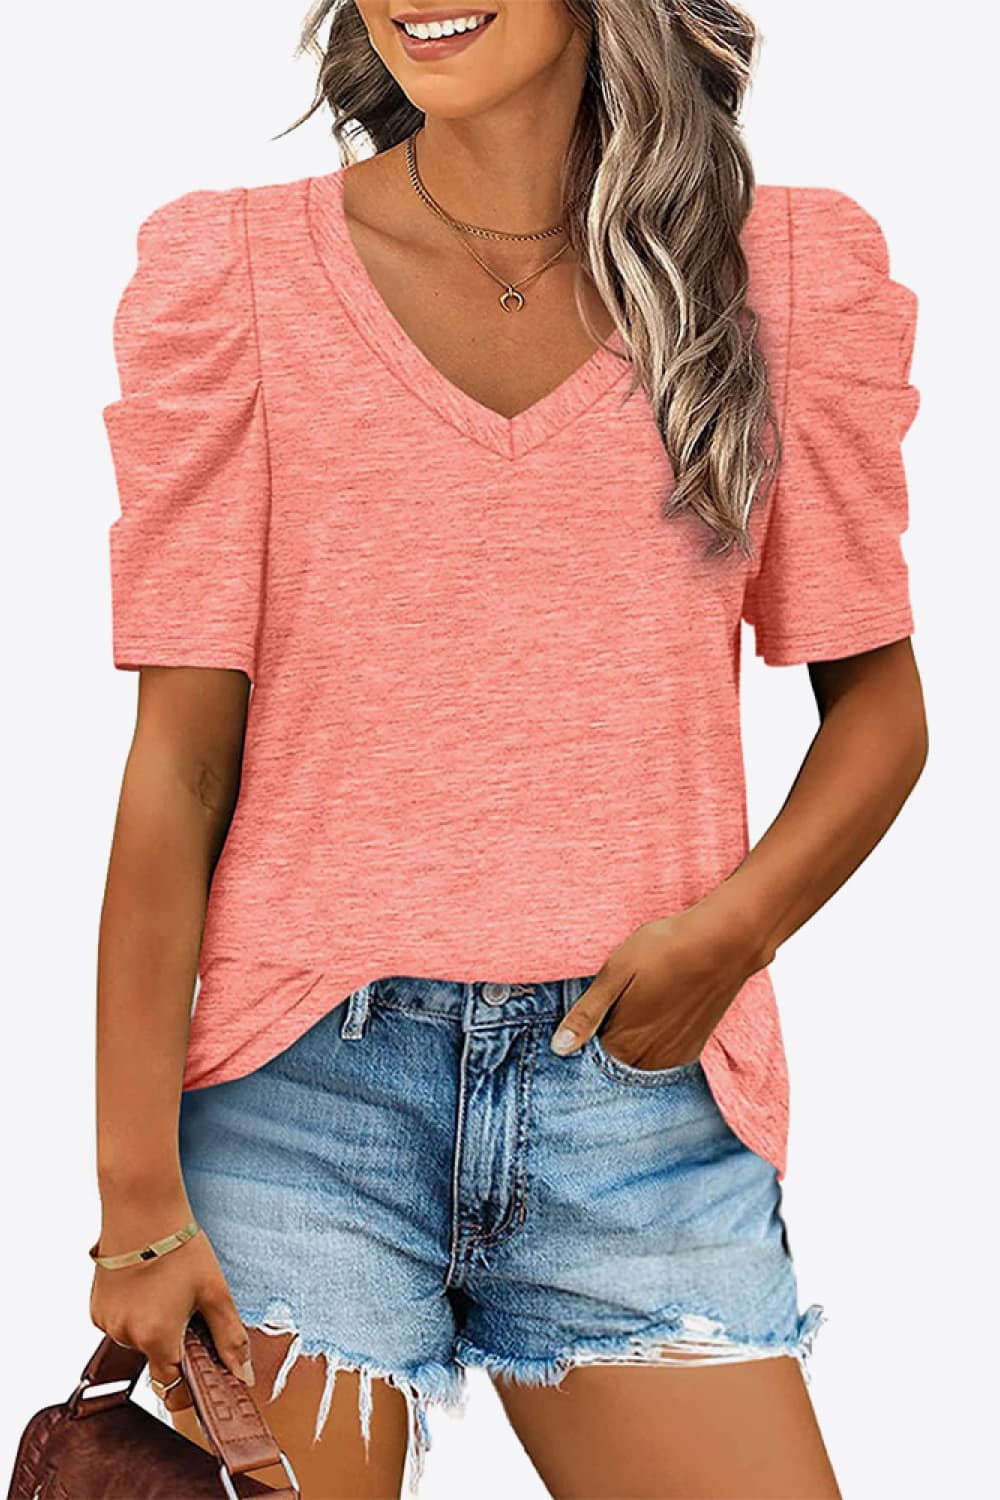 V-Neck Puff Sleeve Tee ( 6 Colors)  Krazy Heart Designs Boutique Coral S 